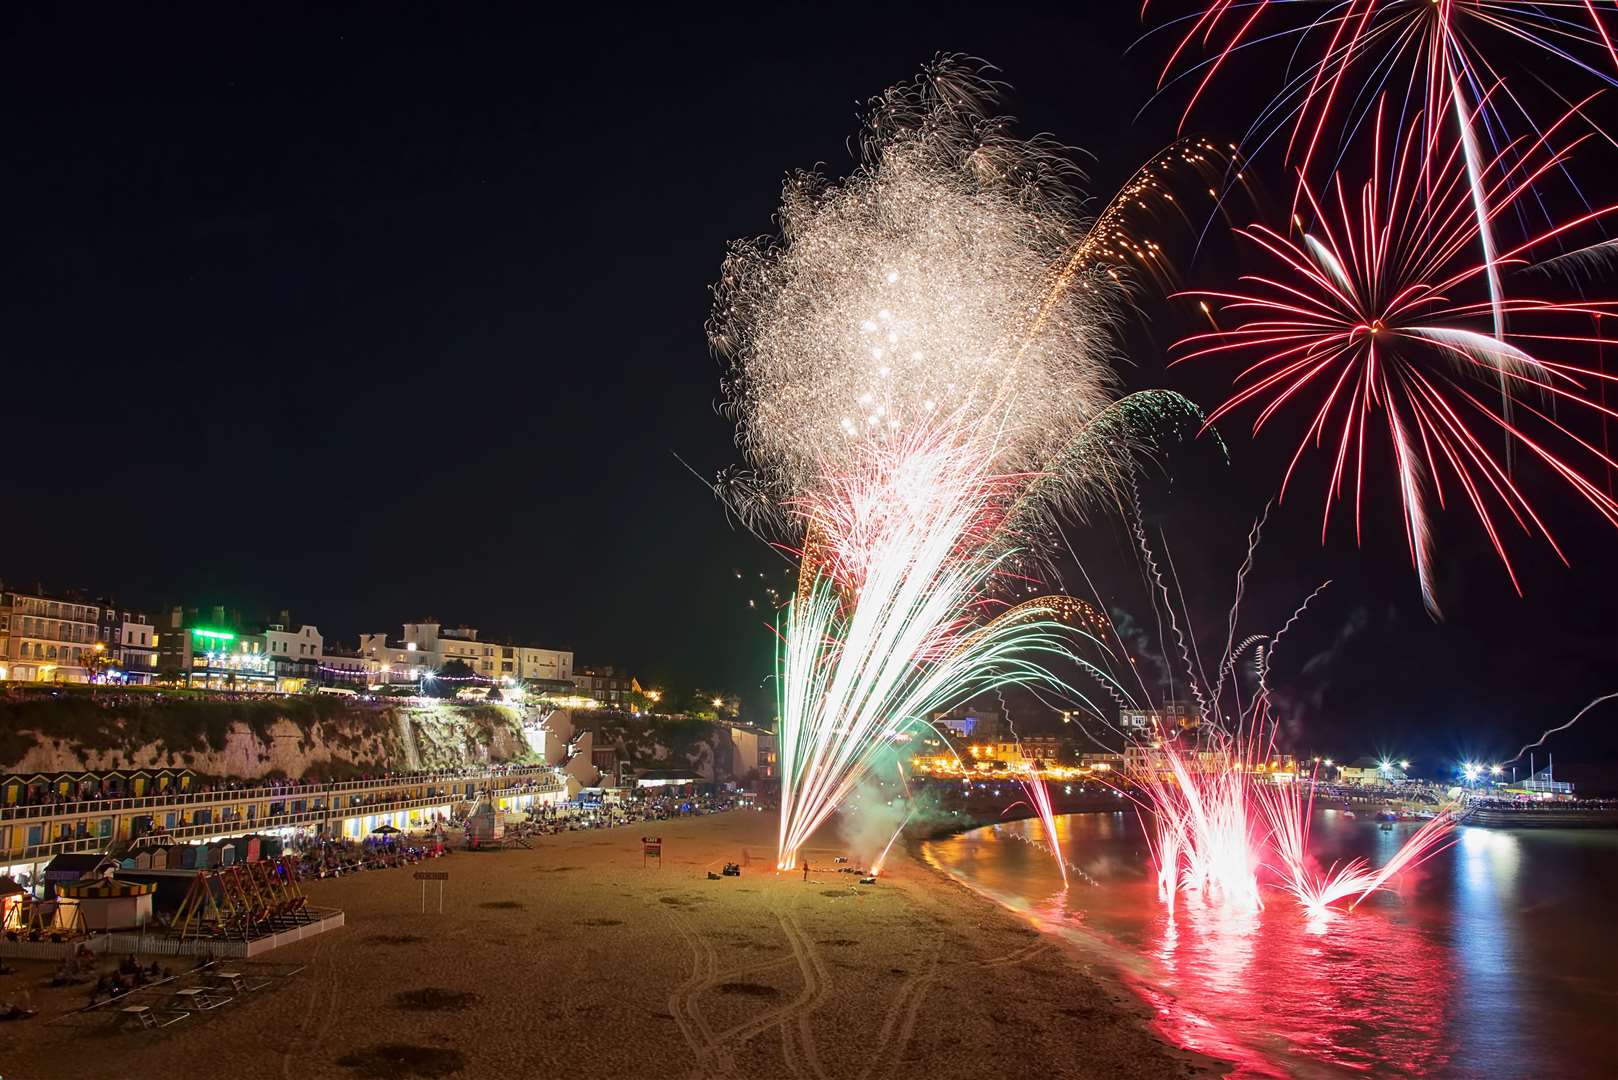 Terry Vick of Cliftonville took this shot at one of the Broadstairs fireworks displays